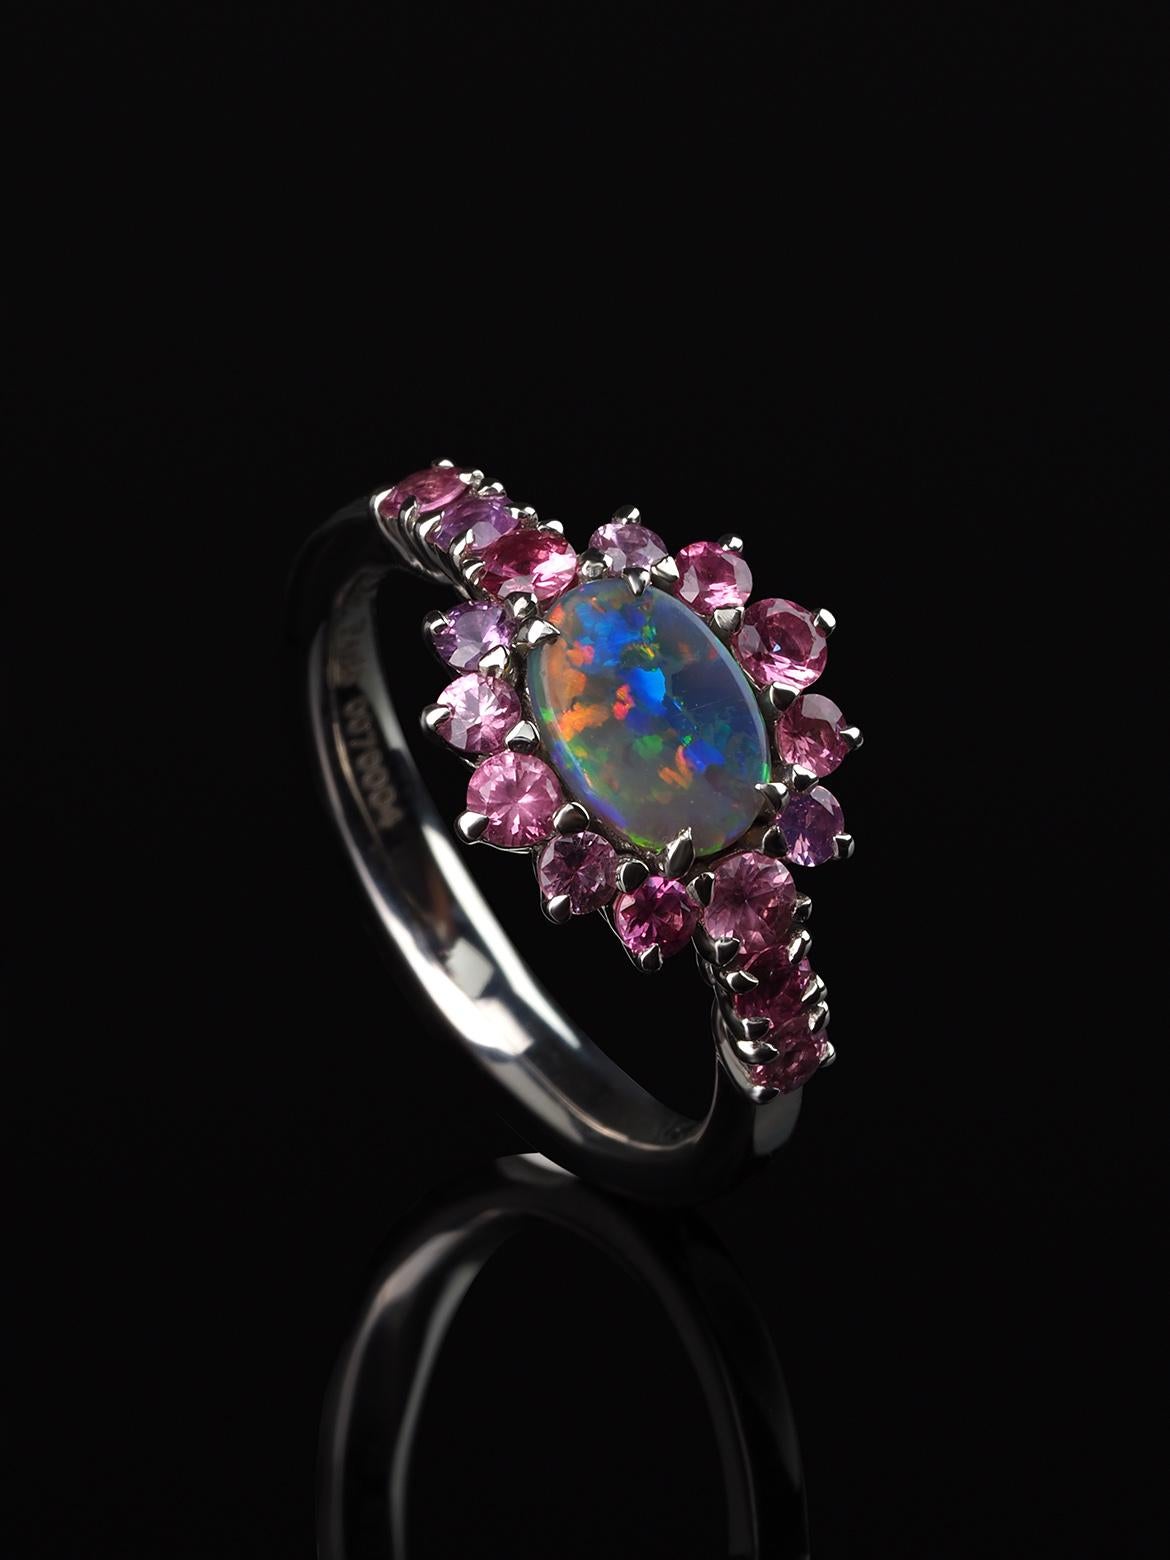 This contemporary custom made engagement ring/promise ring features a unique interplay of naturally beautiful gemstones. An Australian Opal is securely prong set sideways in the center, exhibiting an incredible play-of-color rainbow. This